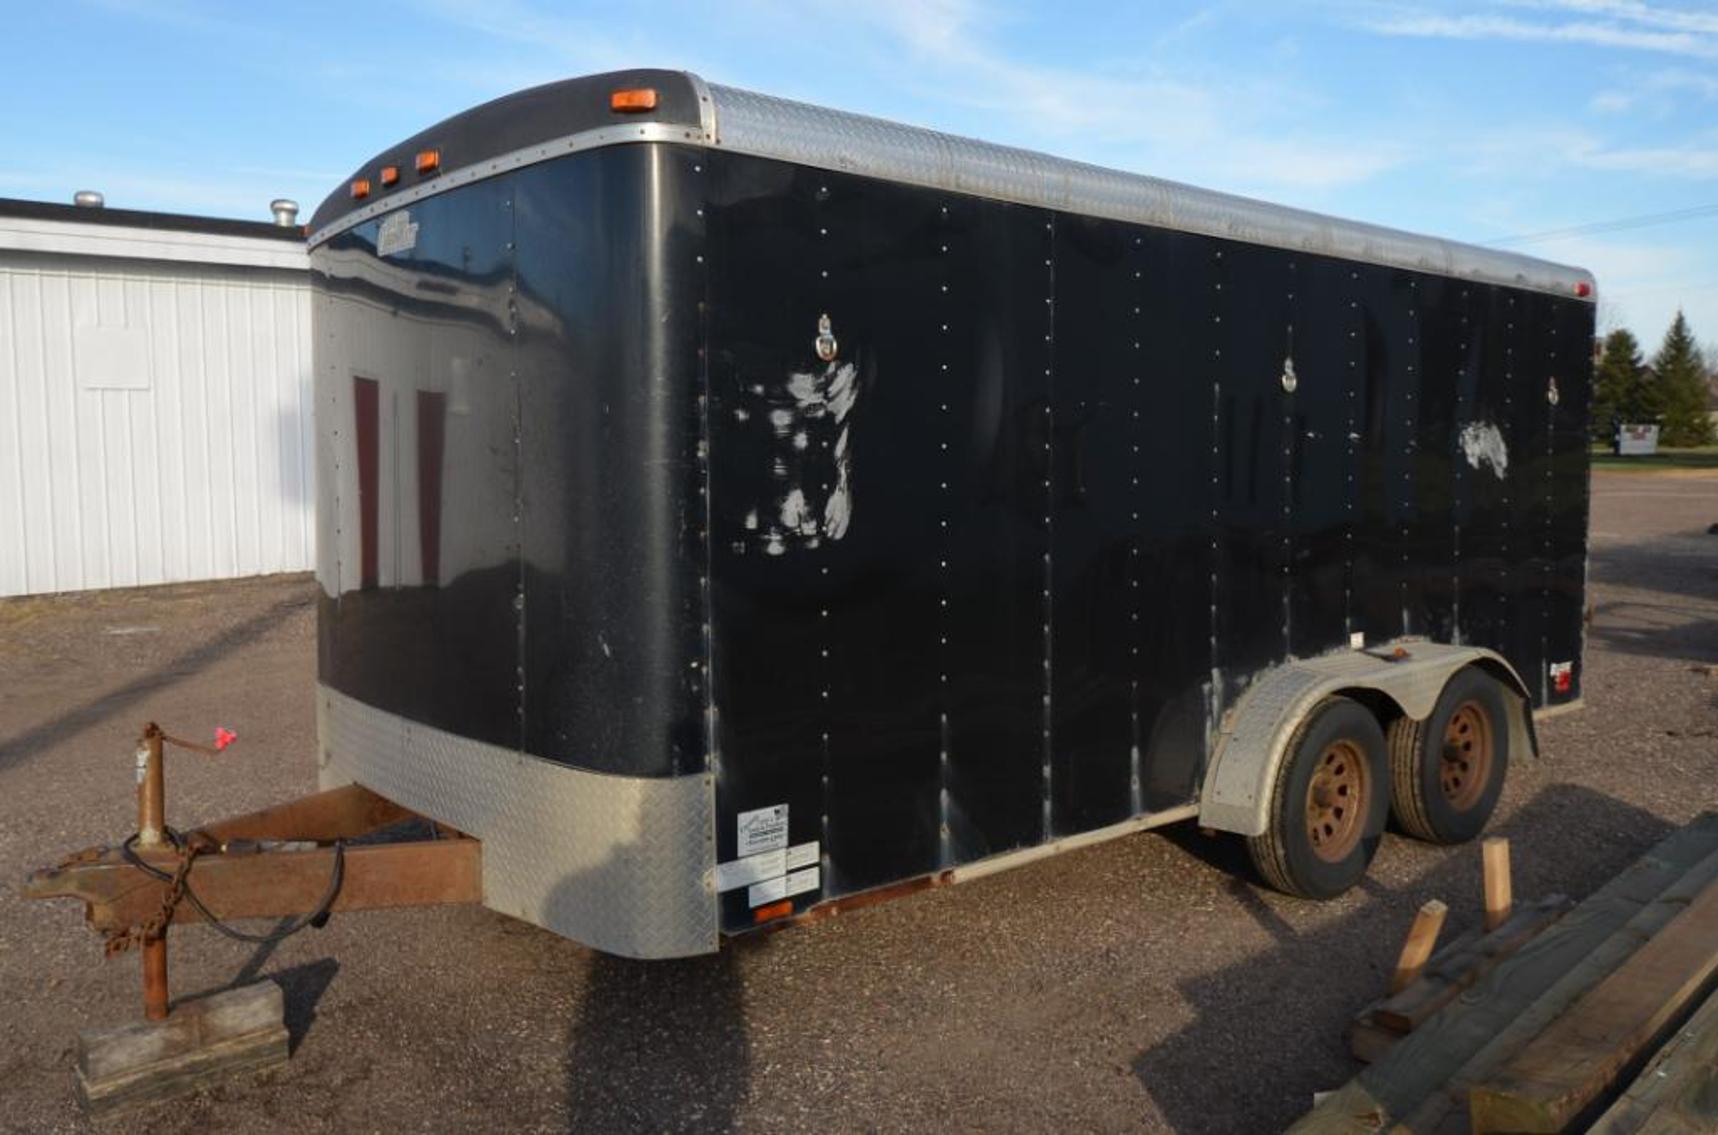 2000 Ford F350, Enclosed Trailer, 100+ Morgan Silver Dollars, 18 Steamer Trunks, Tools & More!